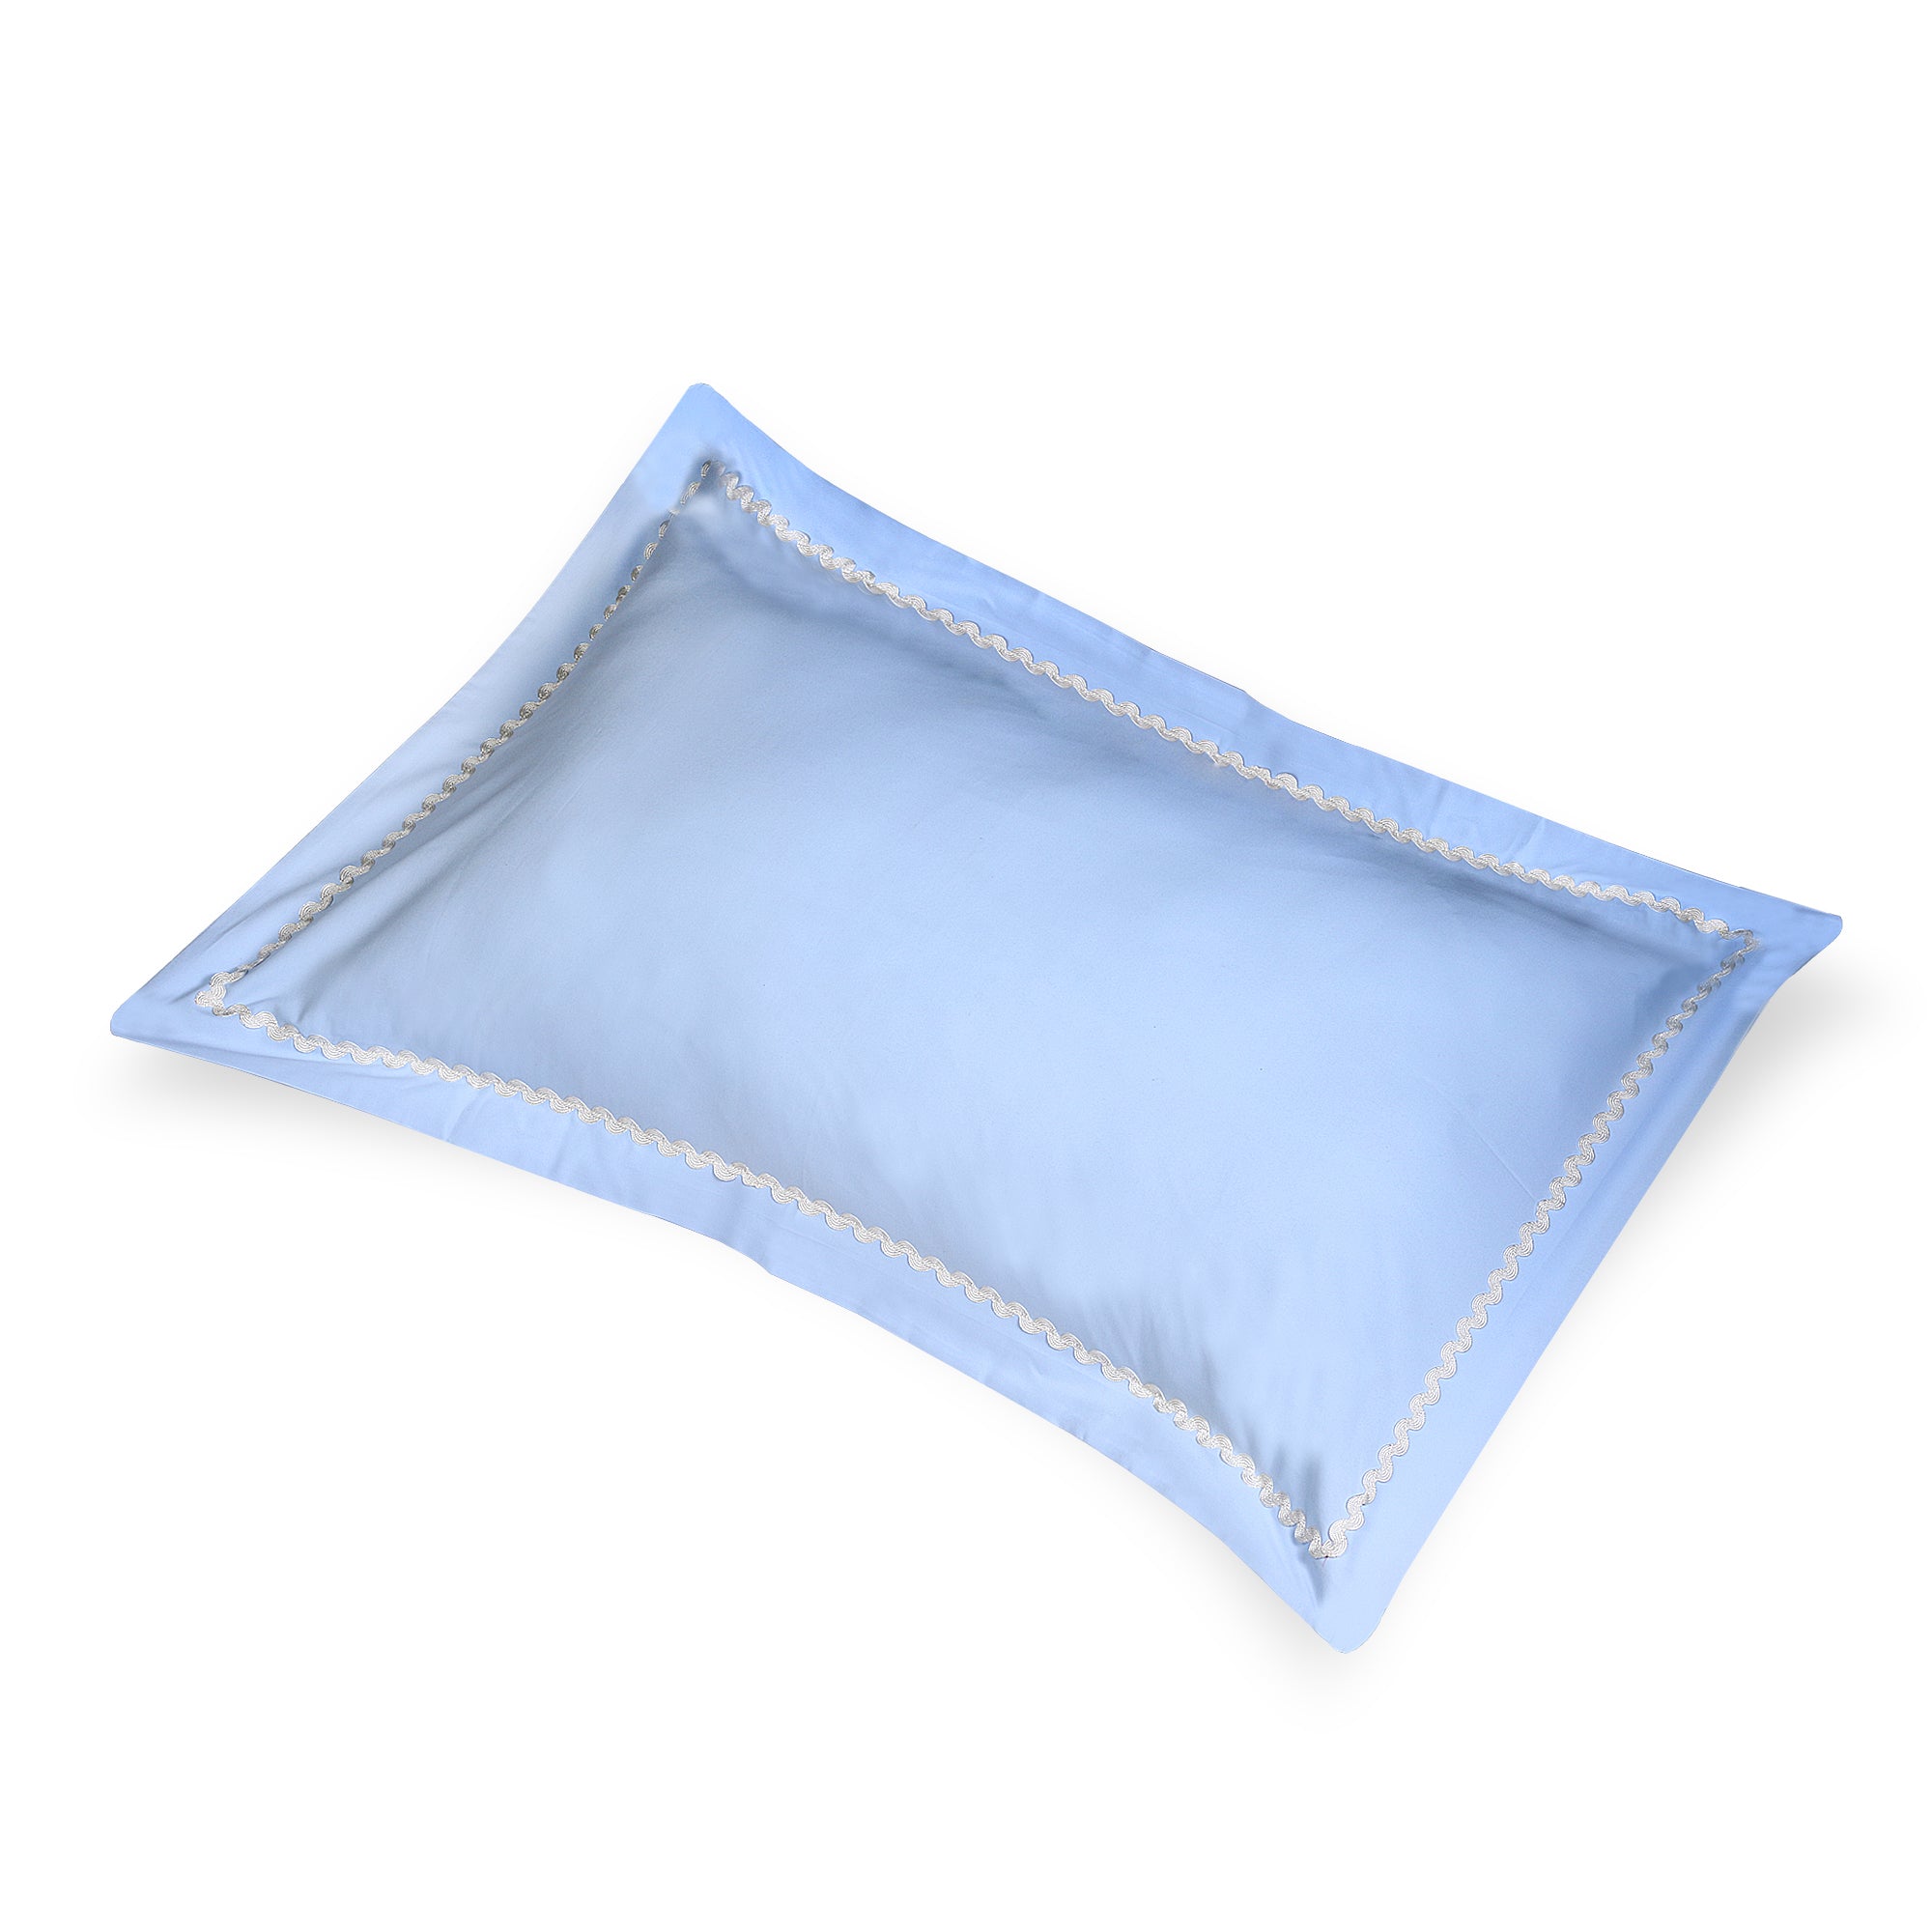 V2G Plain Color Pillow Covers-Sky Blue with Lace- Pair